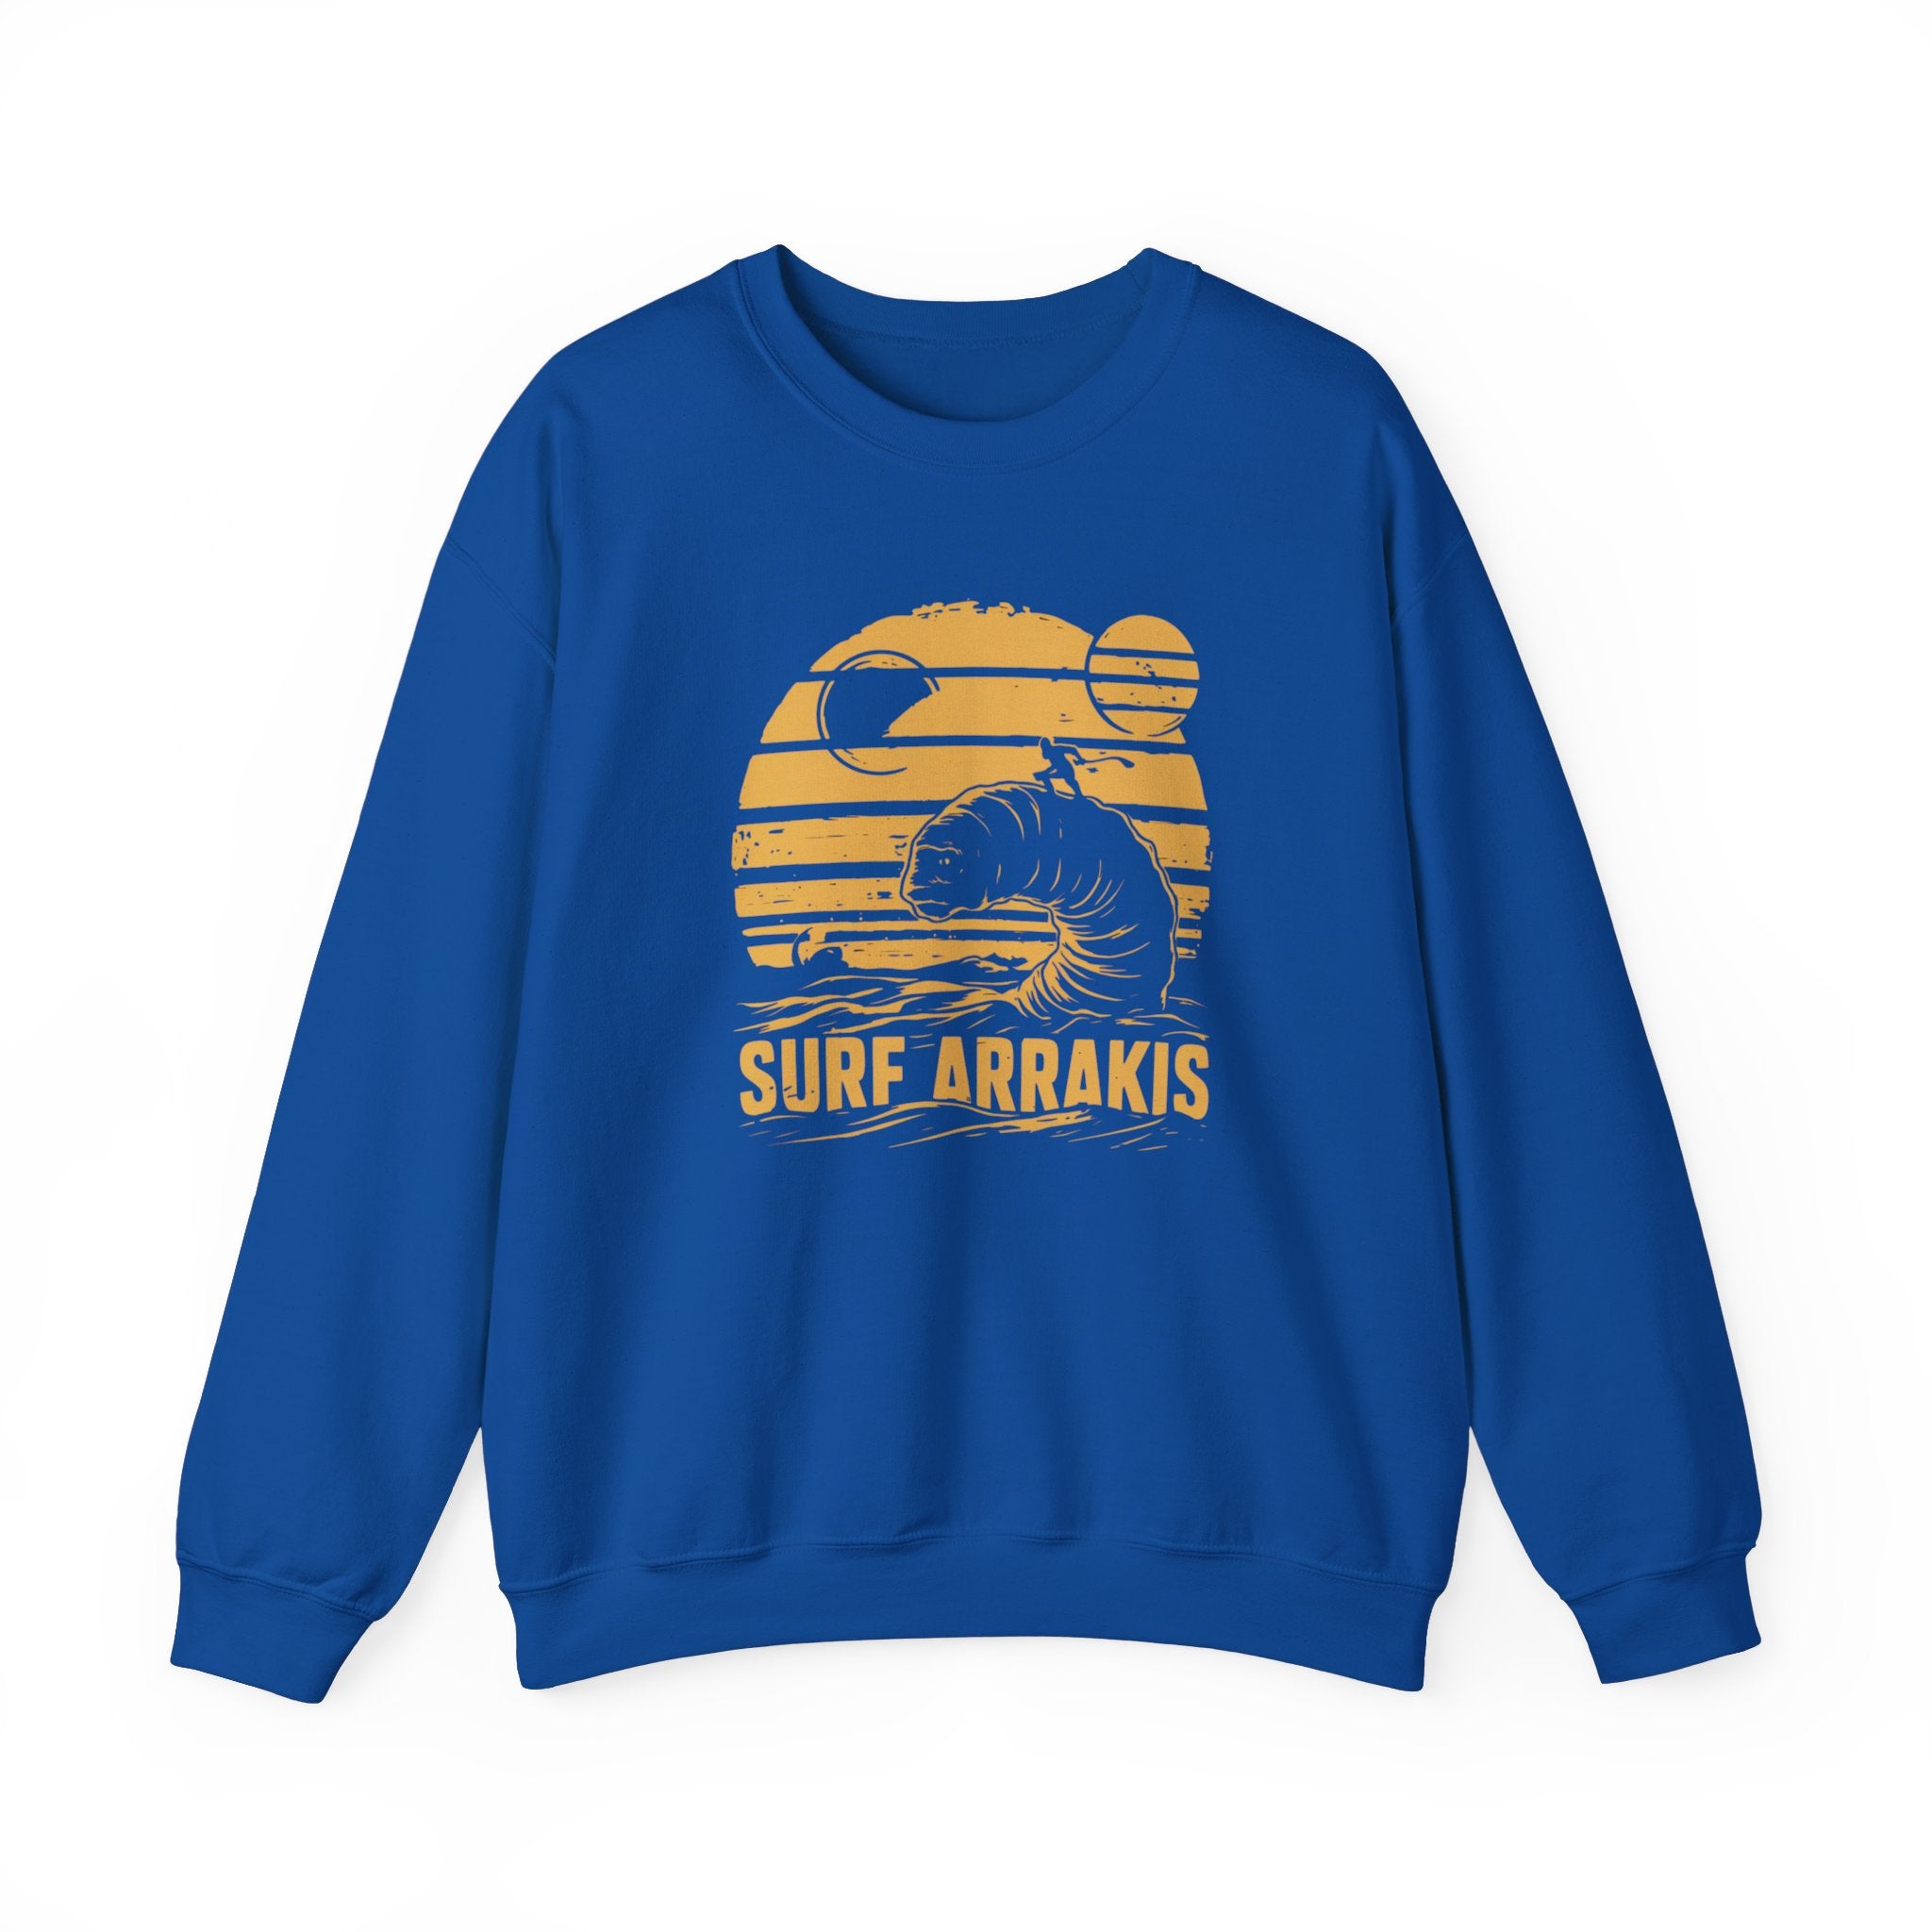 Surf Arrakis - Sweatshirt: A blue sweatshirt featuring a unique design with a graphic of a wave, two moons, and the text "Surf Arrakis" in yellow—perfect for the colder months.